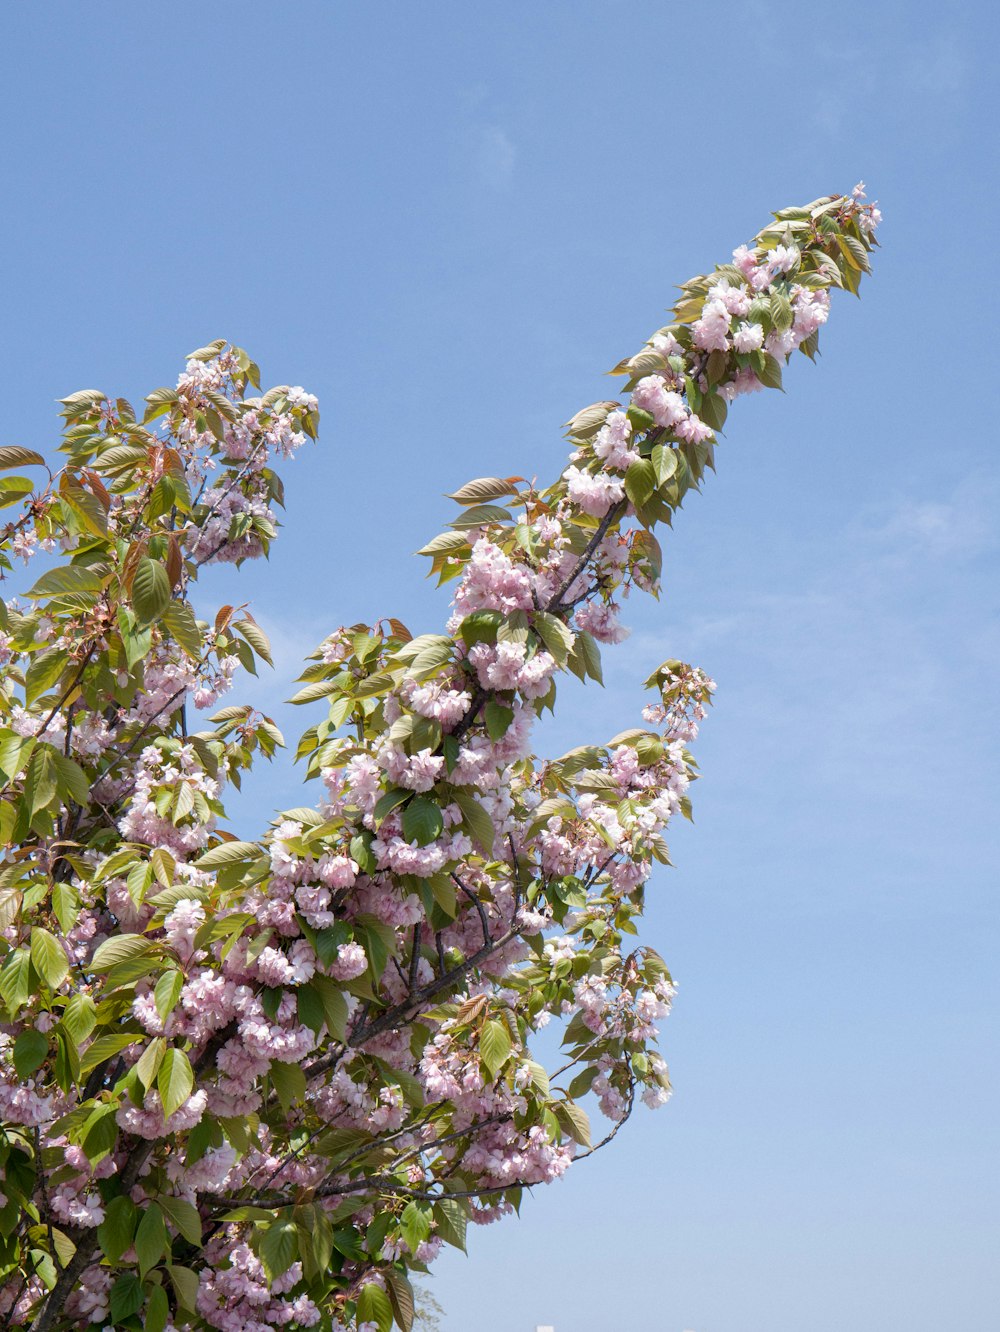 a large tree with lots of purple flowers